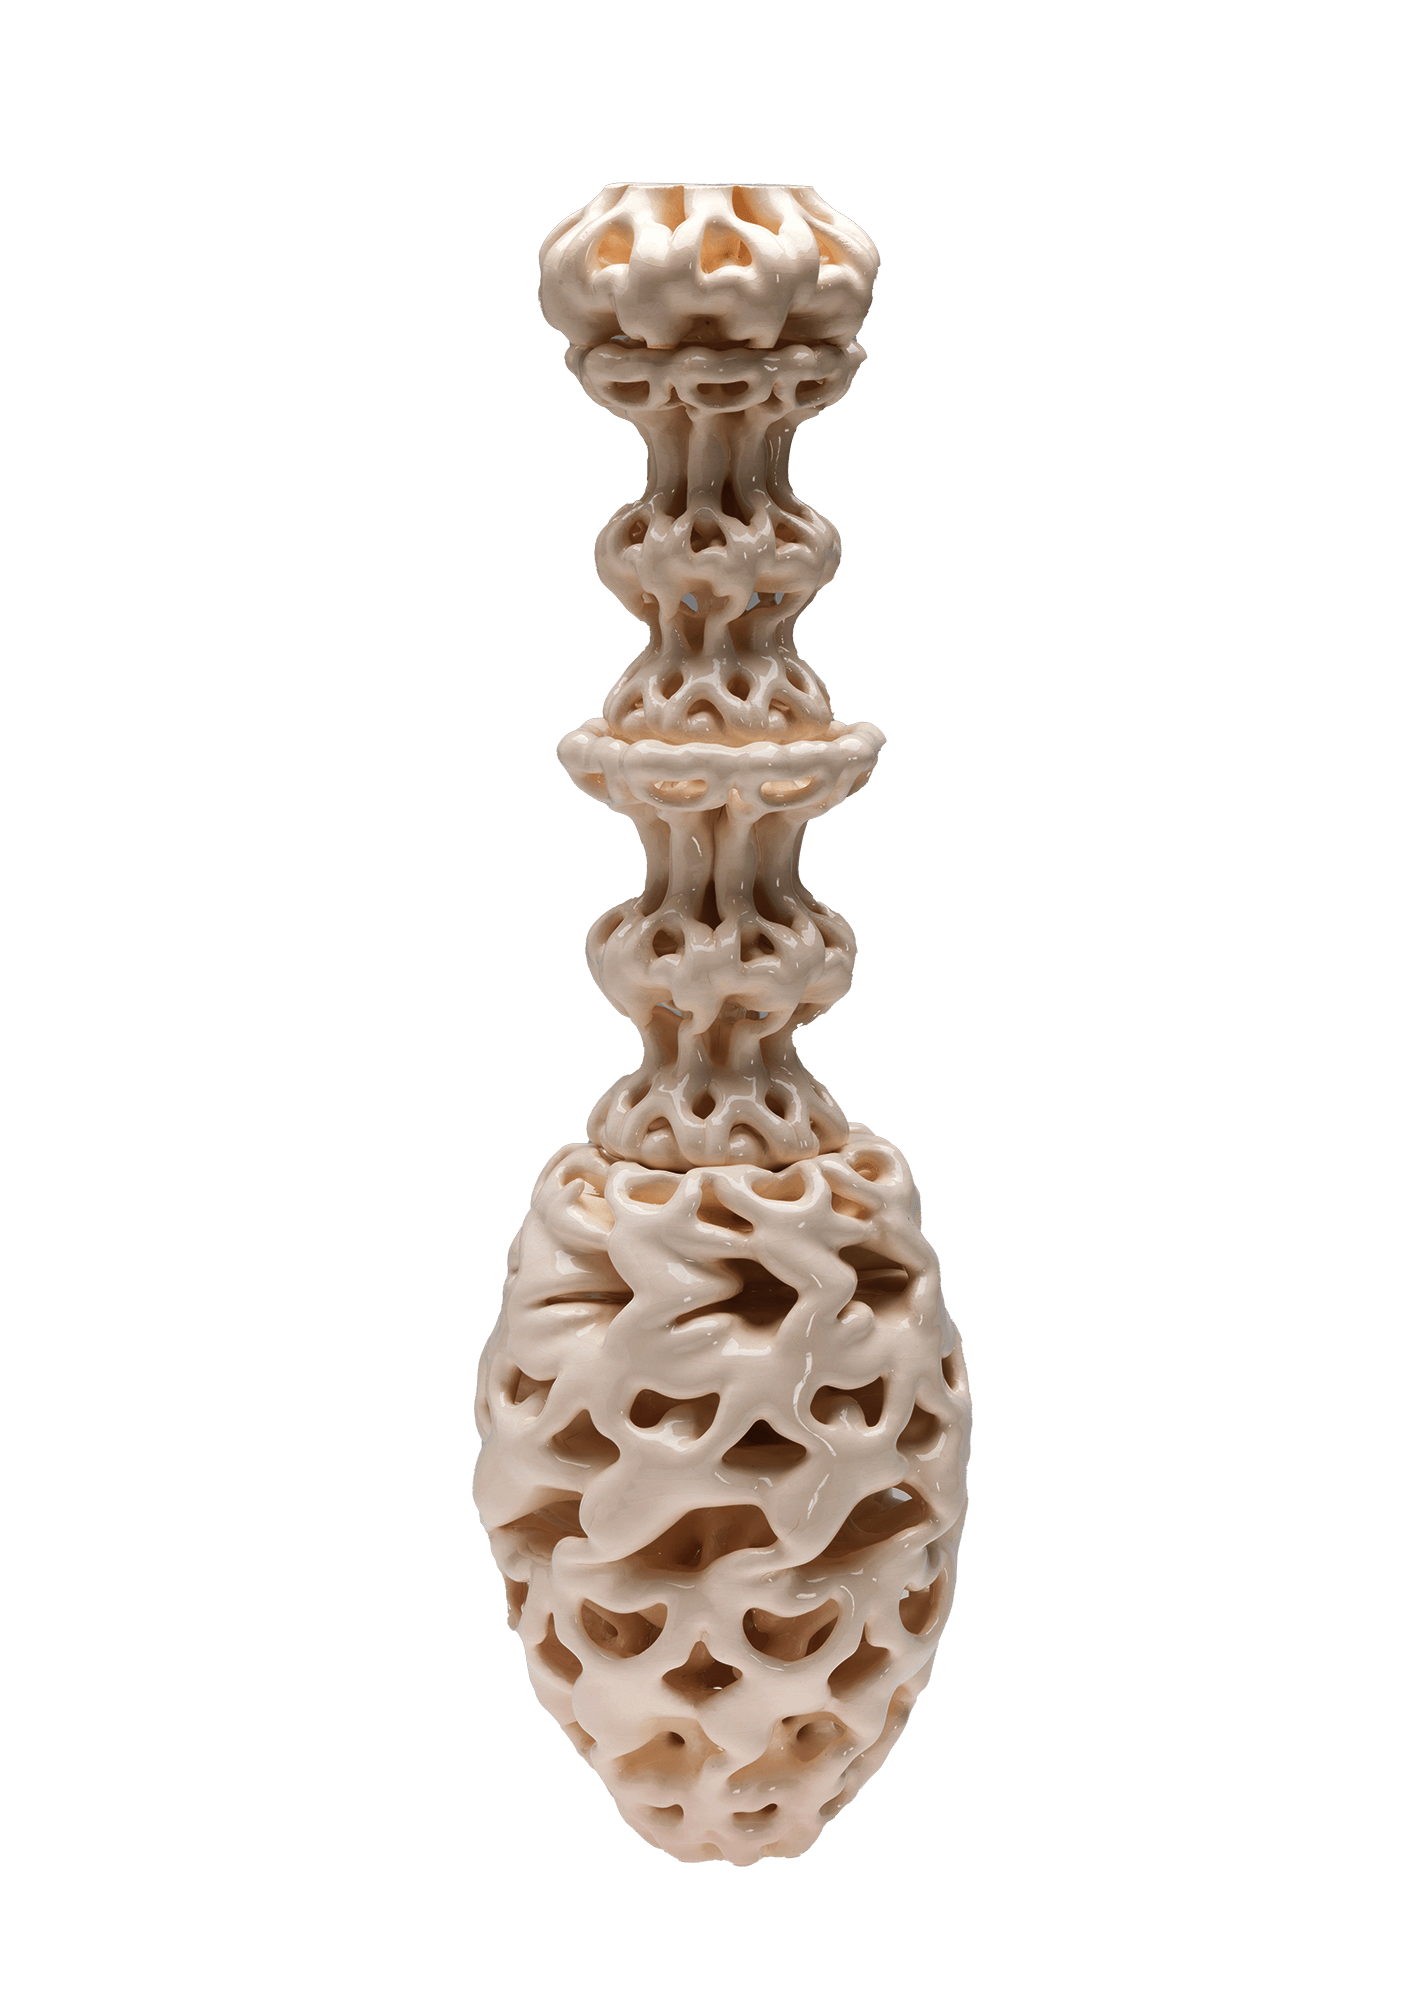 3D-printed ceramic vessel with a skeletal-like structure featuring an oval base connectd to a tall stem